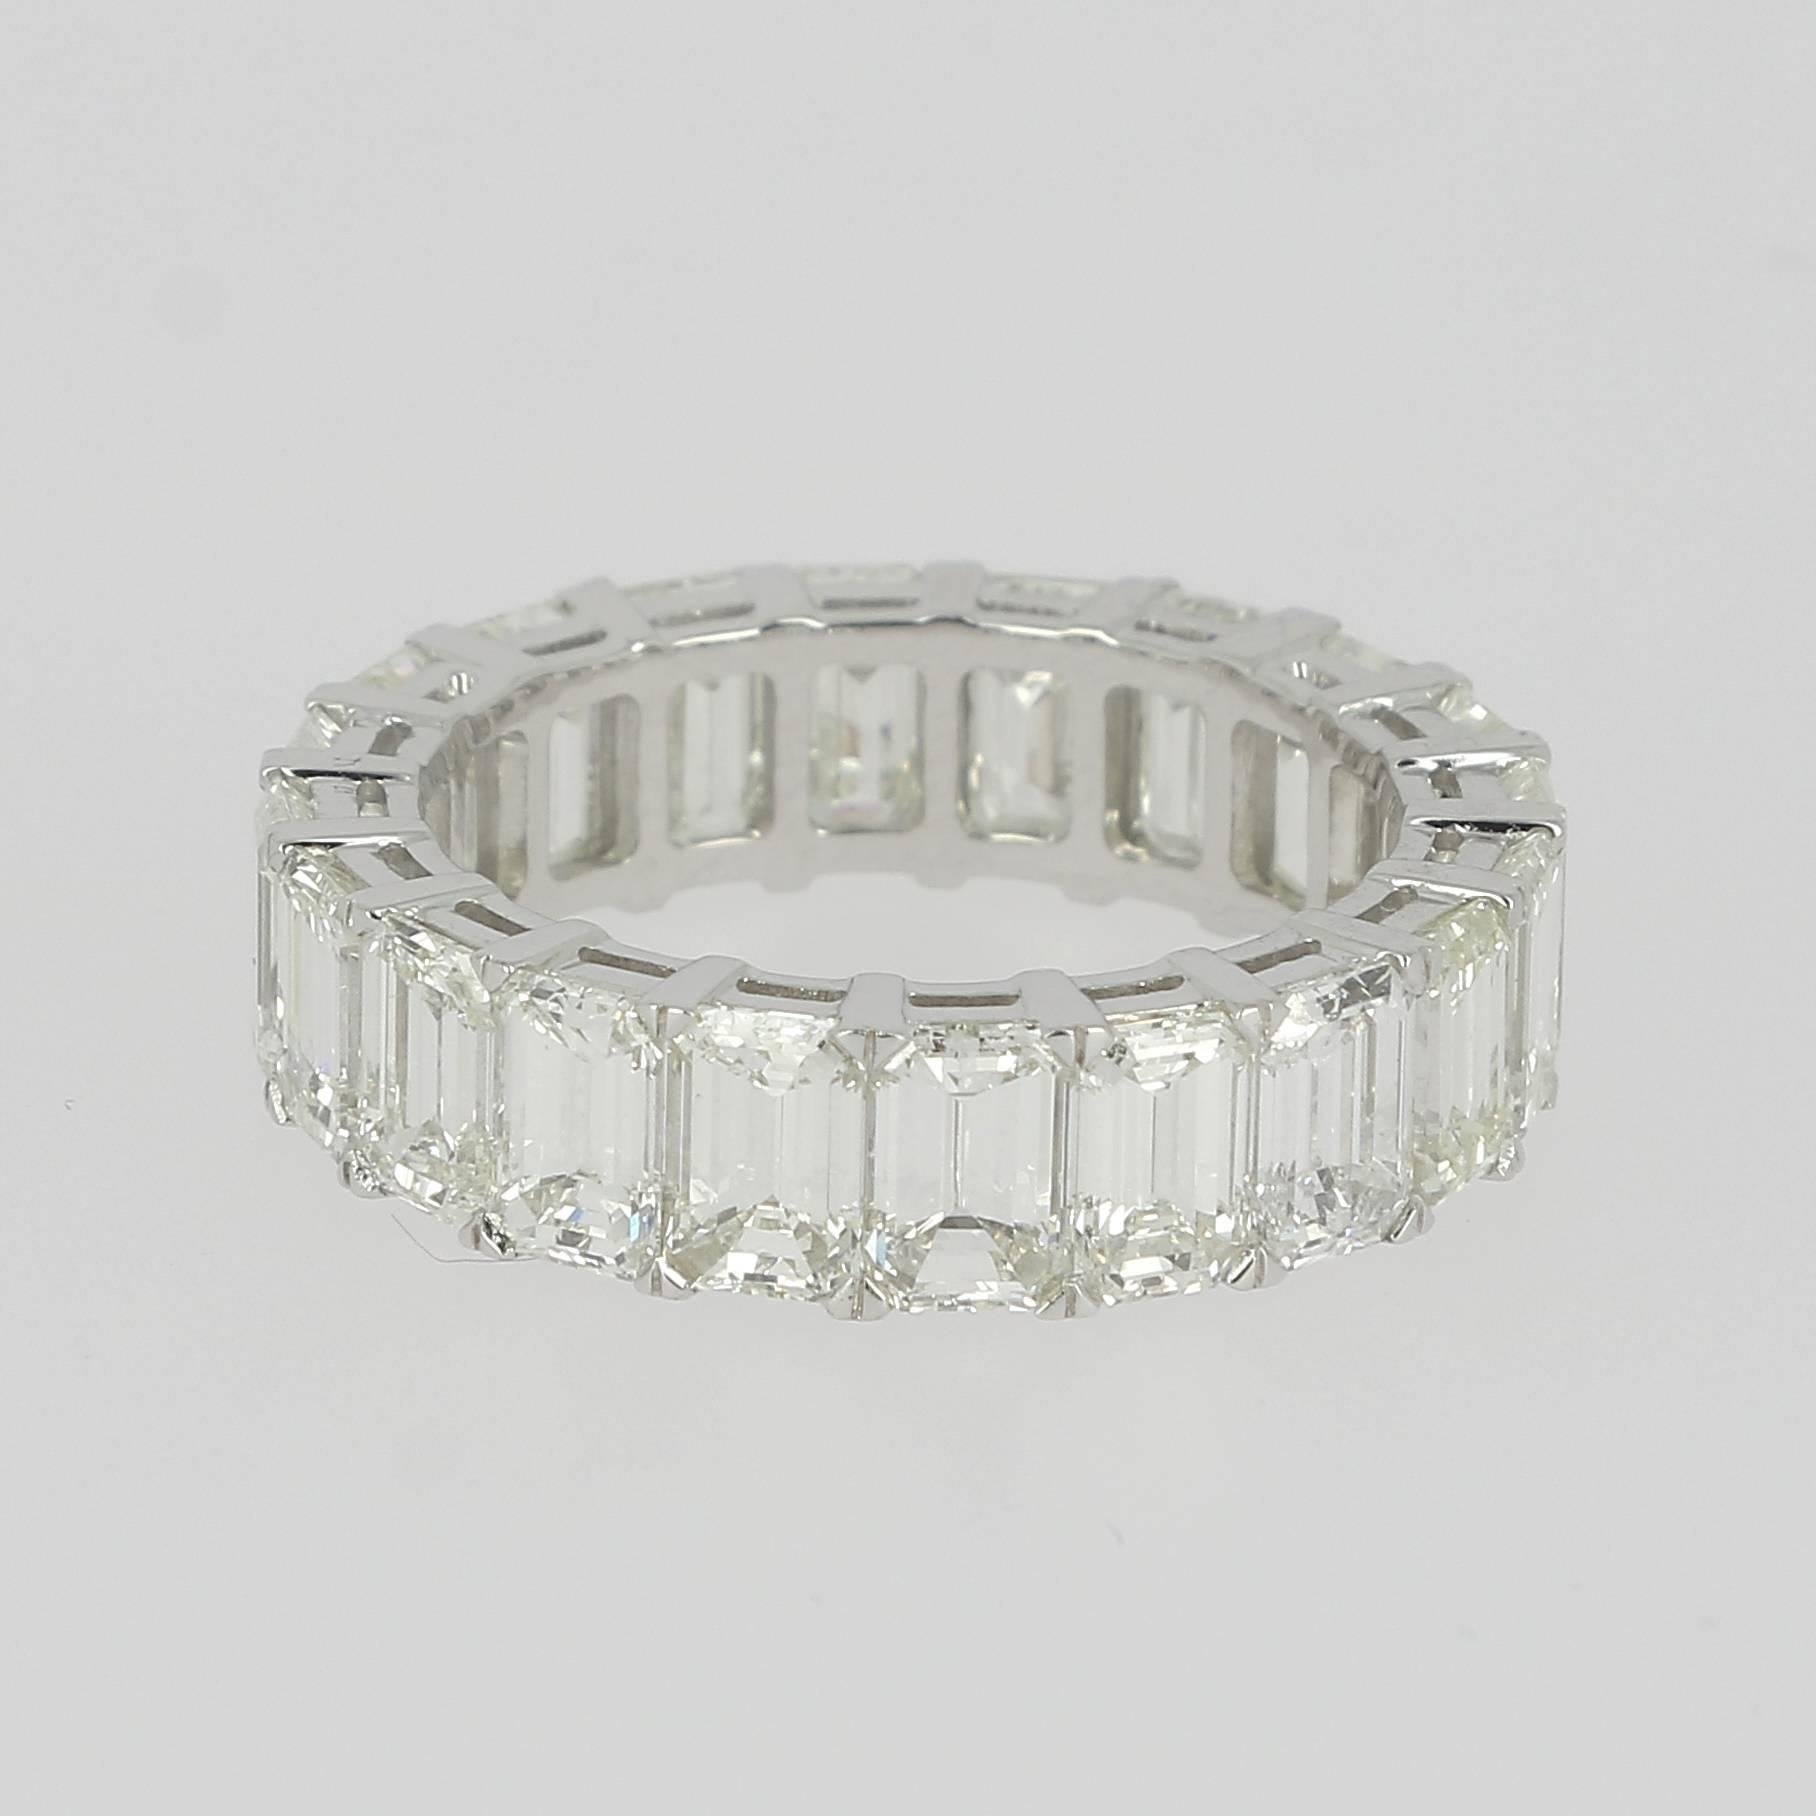 Contemporary 7.10 Carat Emerald Cut White Diamond Eternity Ring / Band Rings / 18K WhiteGold  For Sale